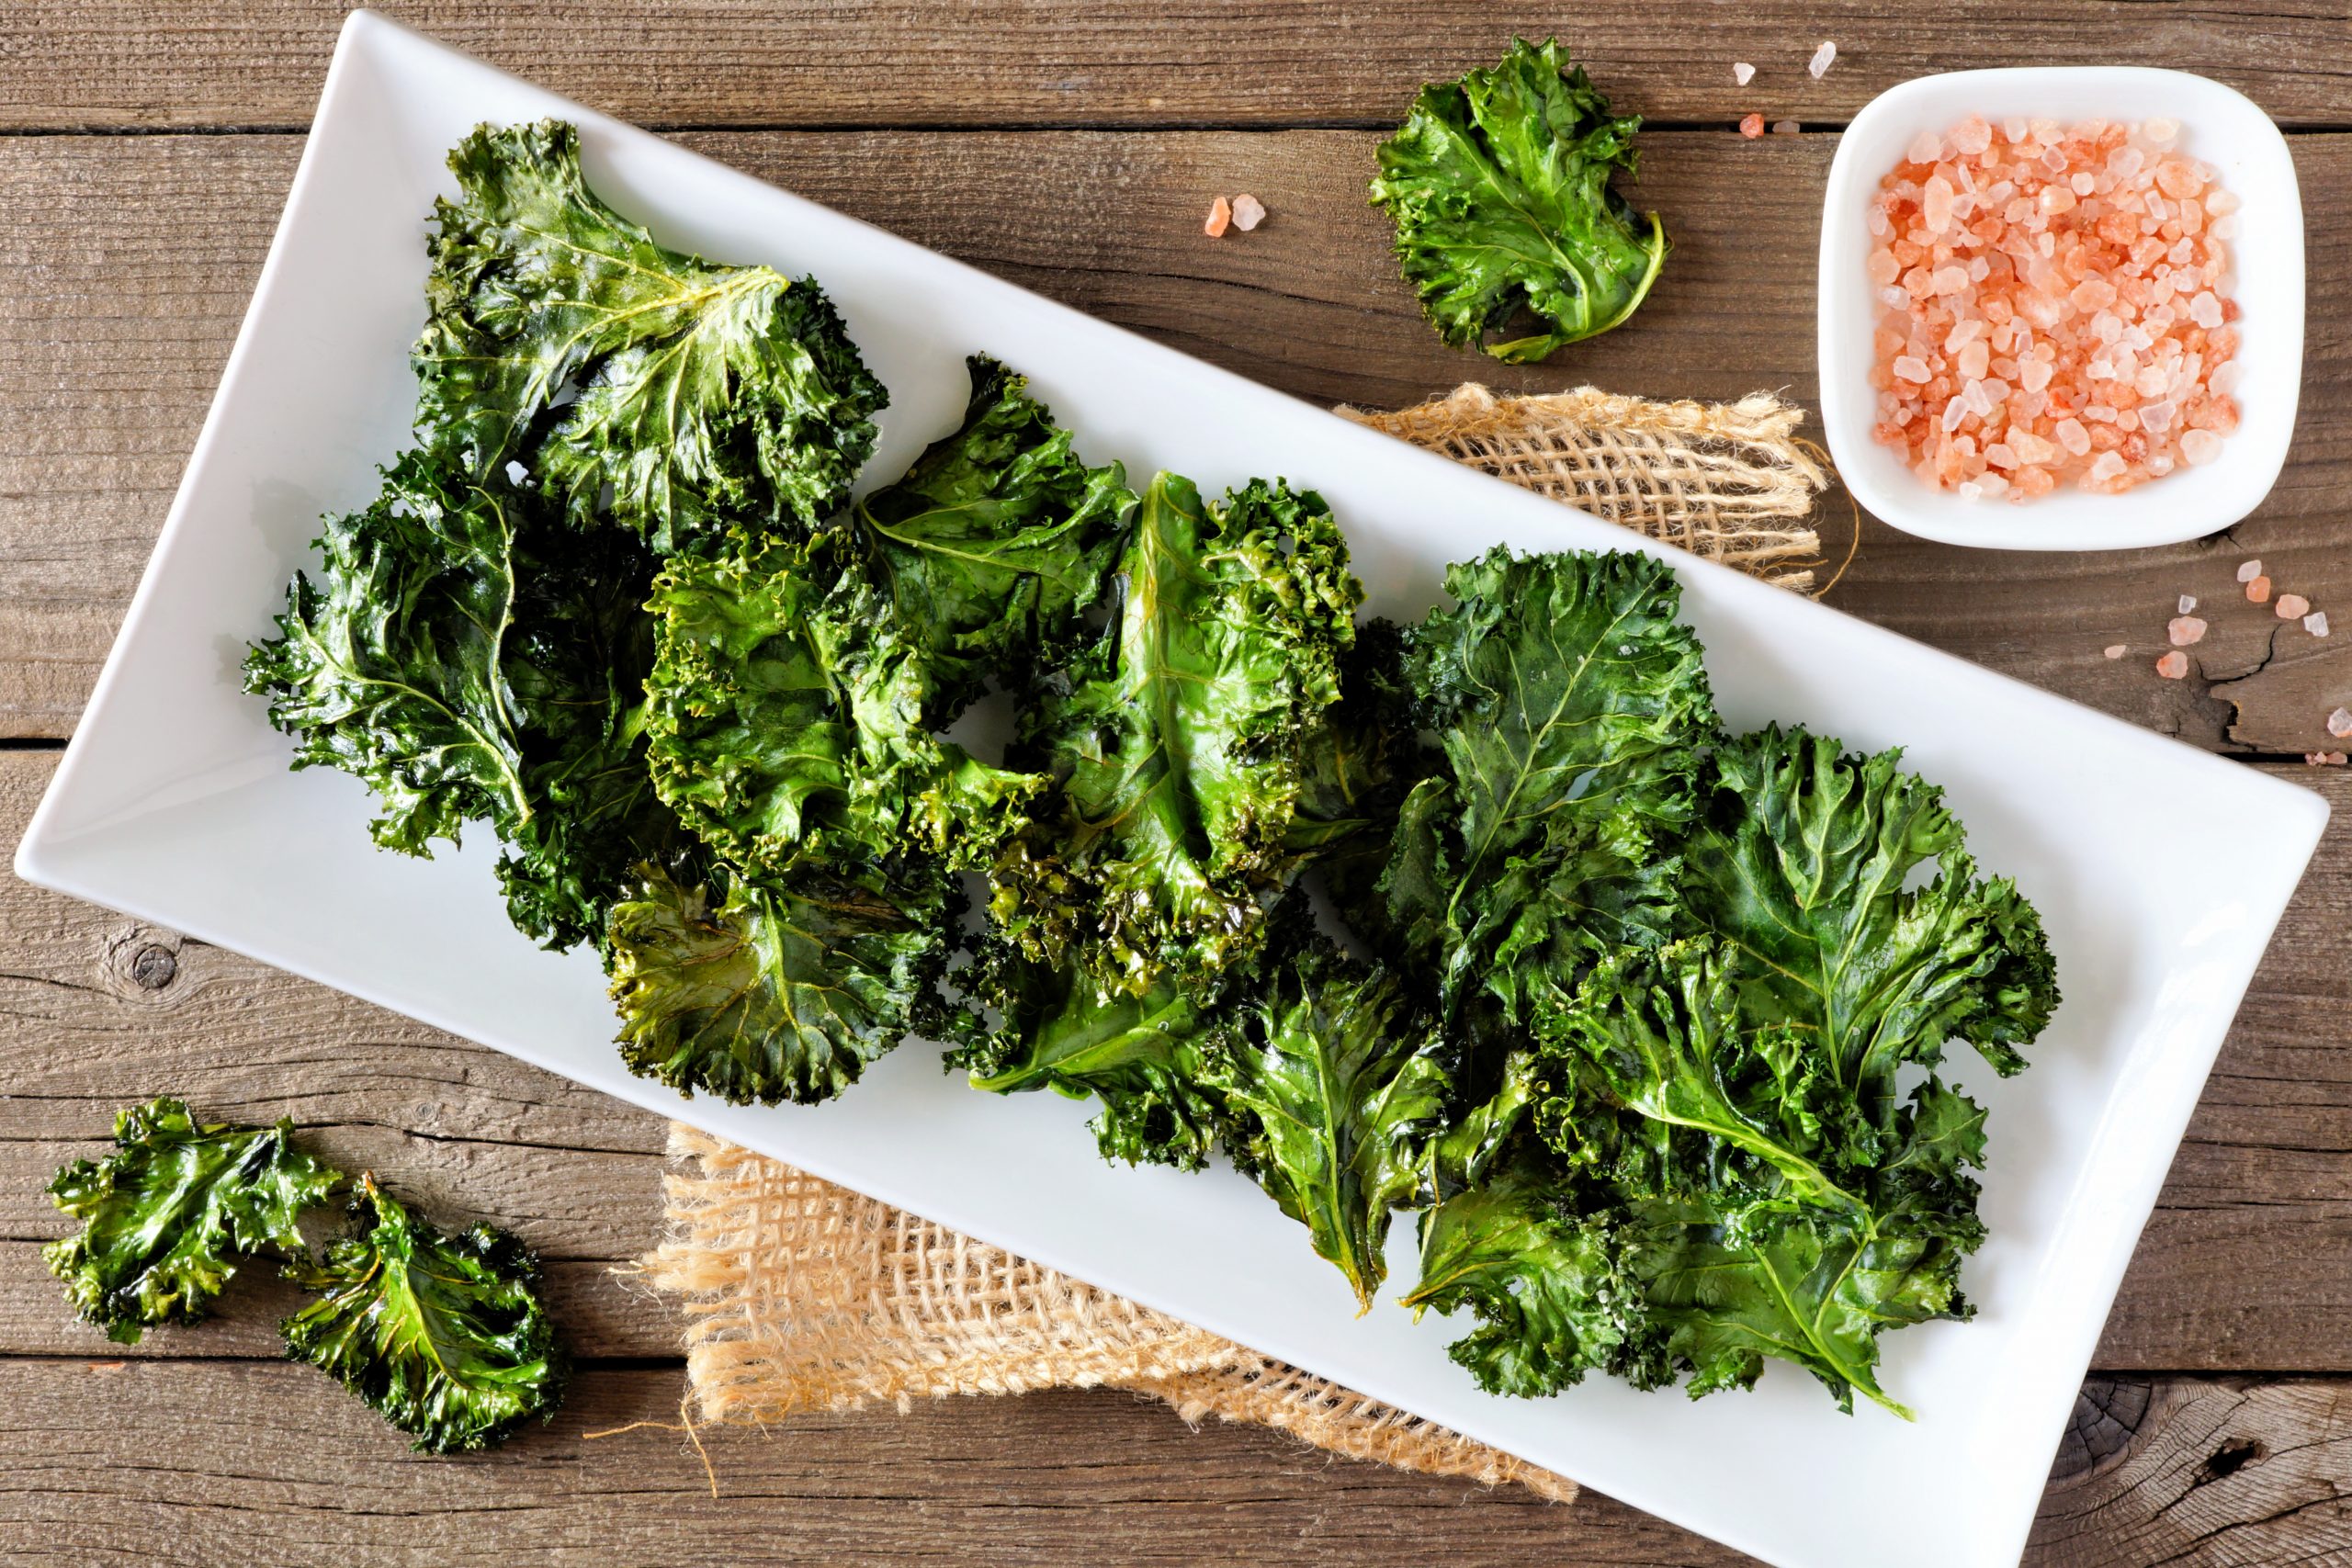 Plate of healthy organic kale chips, top view on rustic a wood background